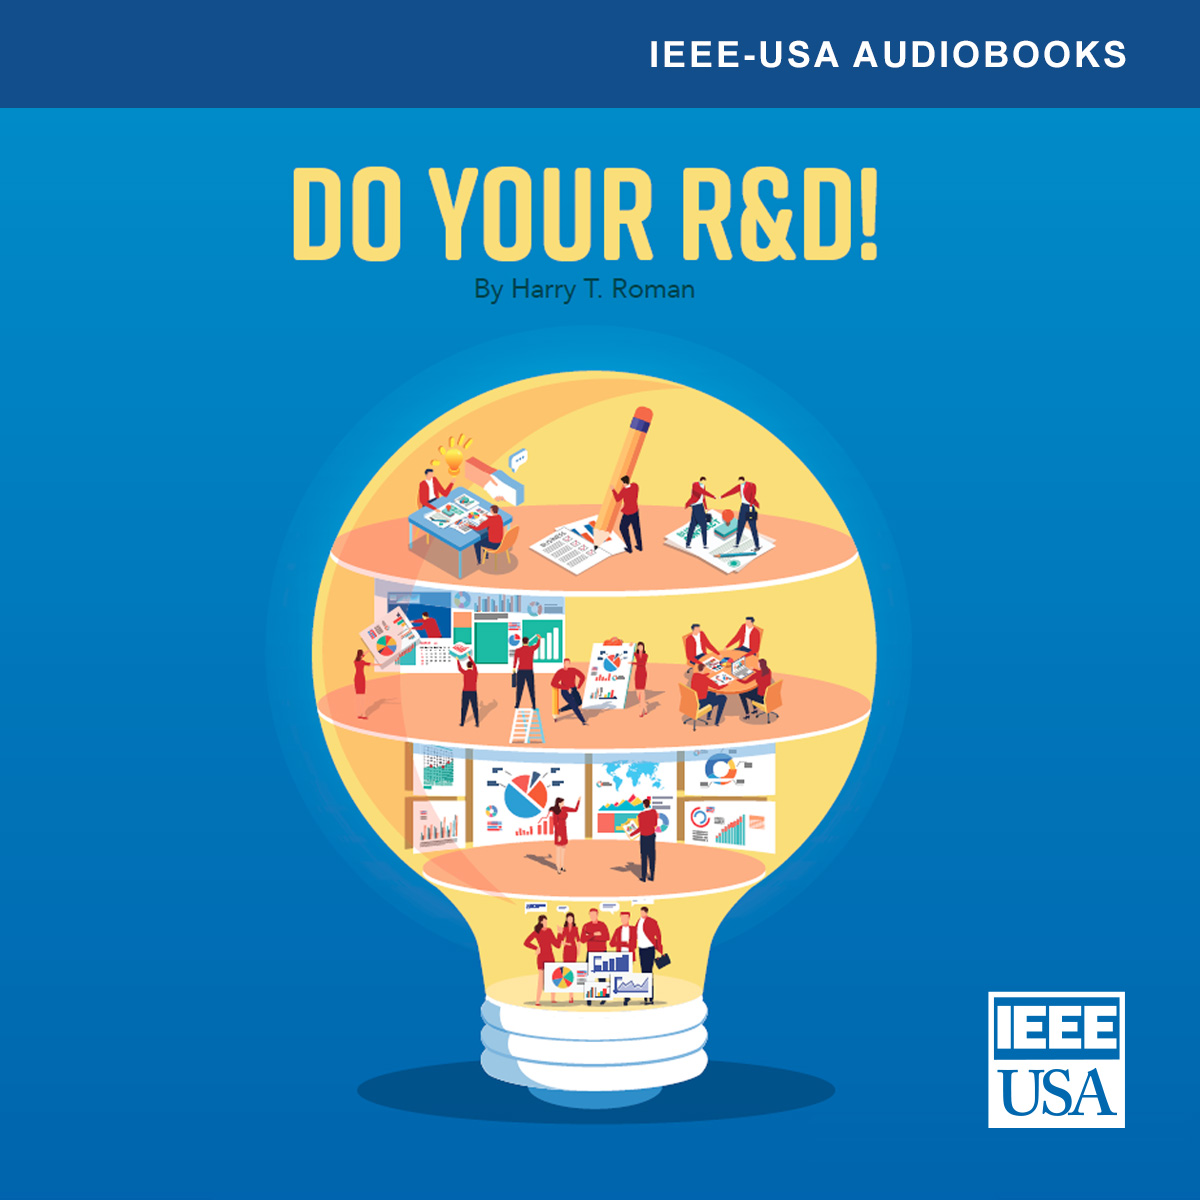 Audiobook: Do Your R&D!